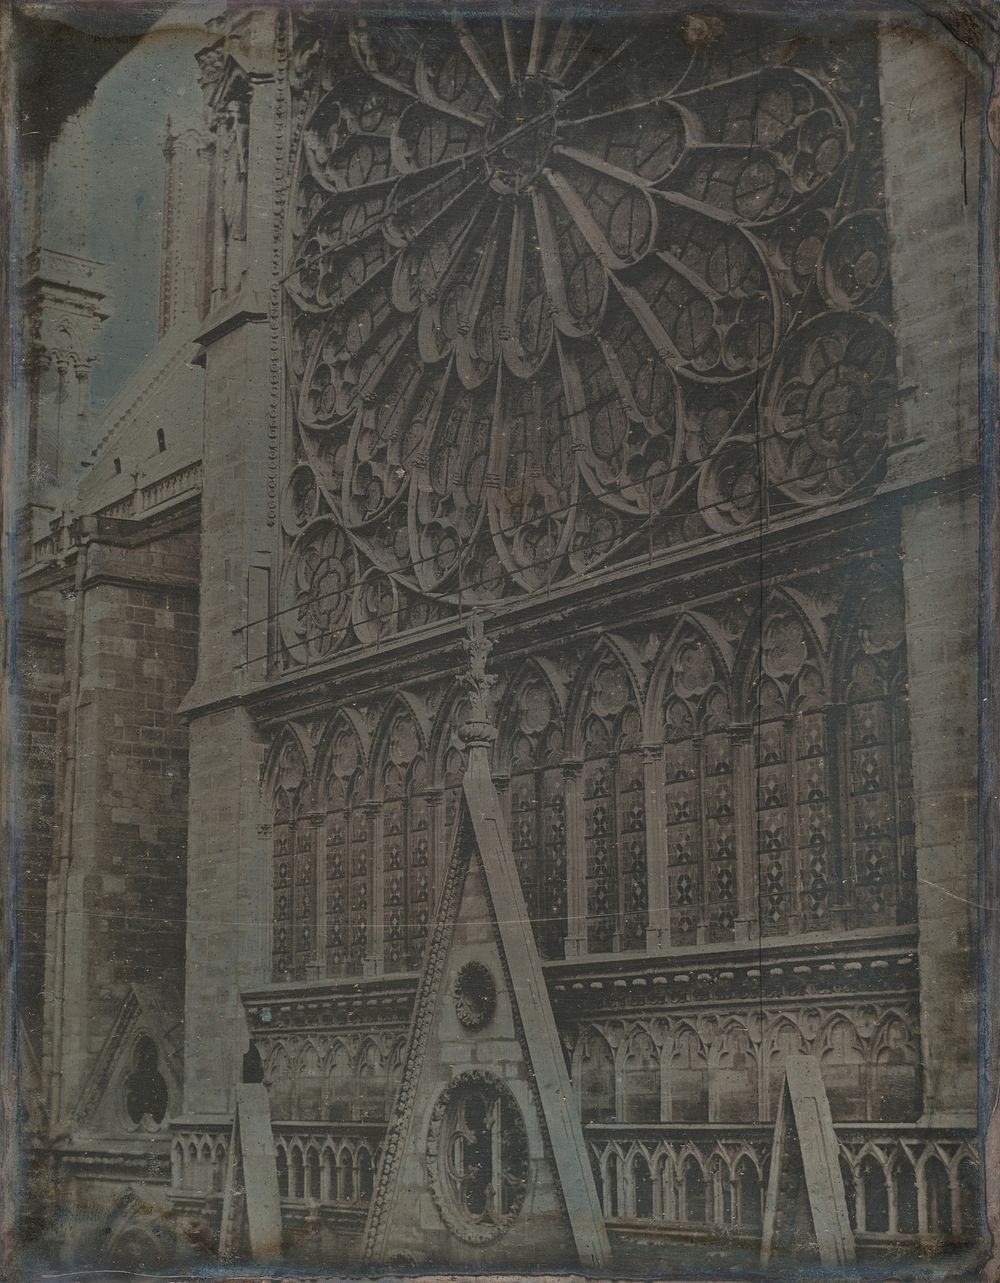 Rose Window, Notre-Dame Cathedral, Paris (277. Troyes. 1841. Cathedrale. Gde. Rose. Fichot-Paris [sic])